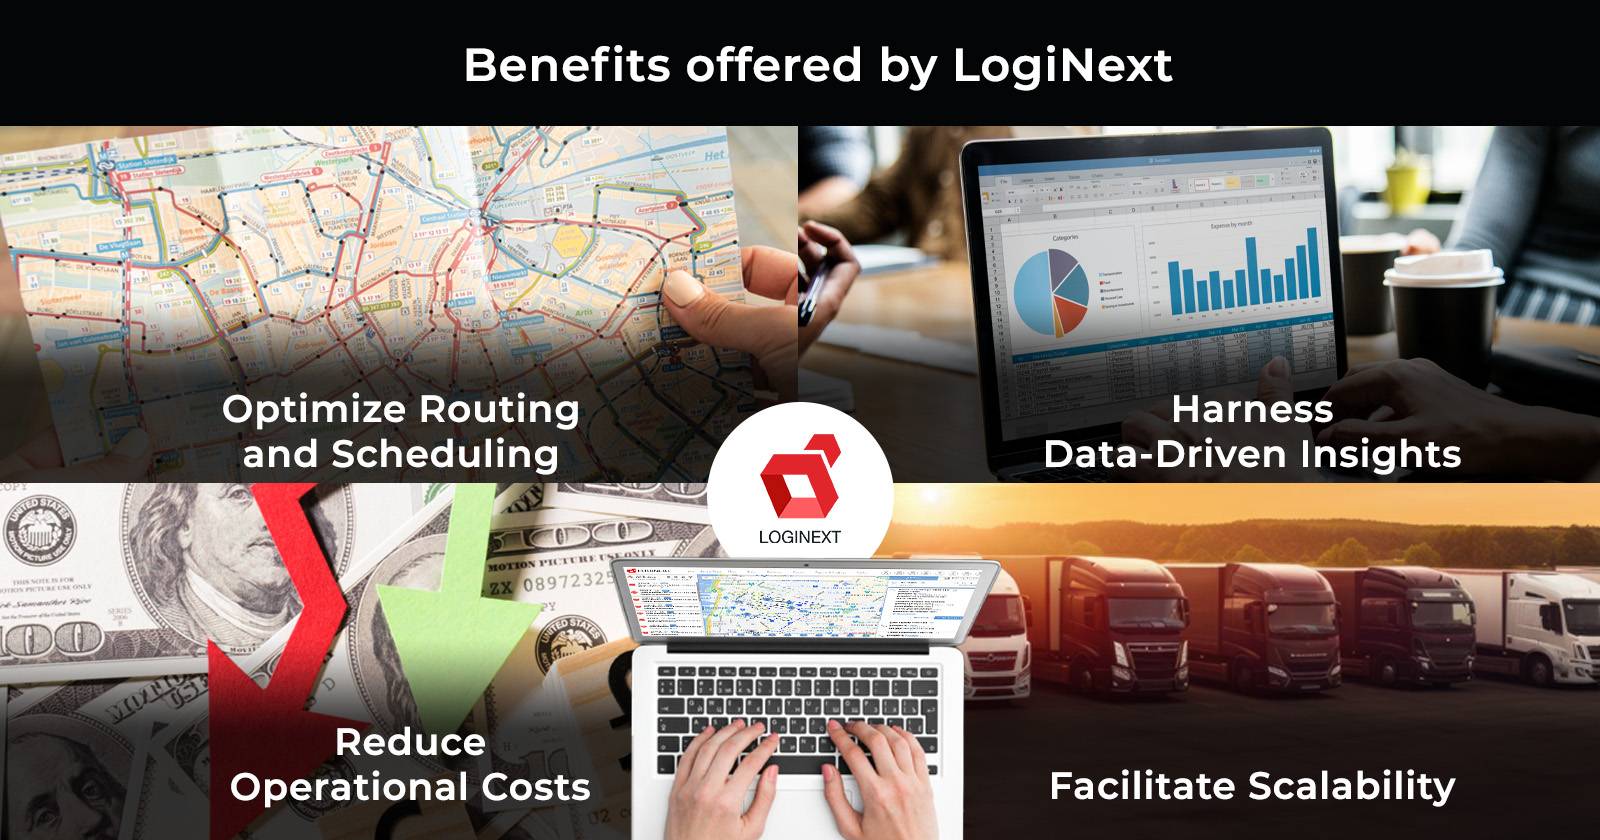 Top 5 Benefits offered by LogiNext's LMS